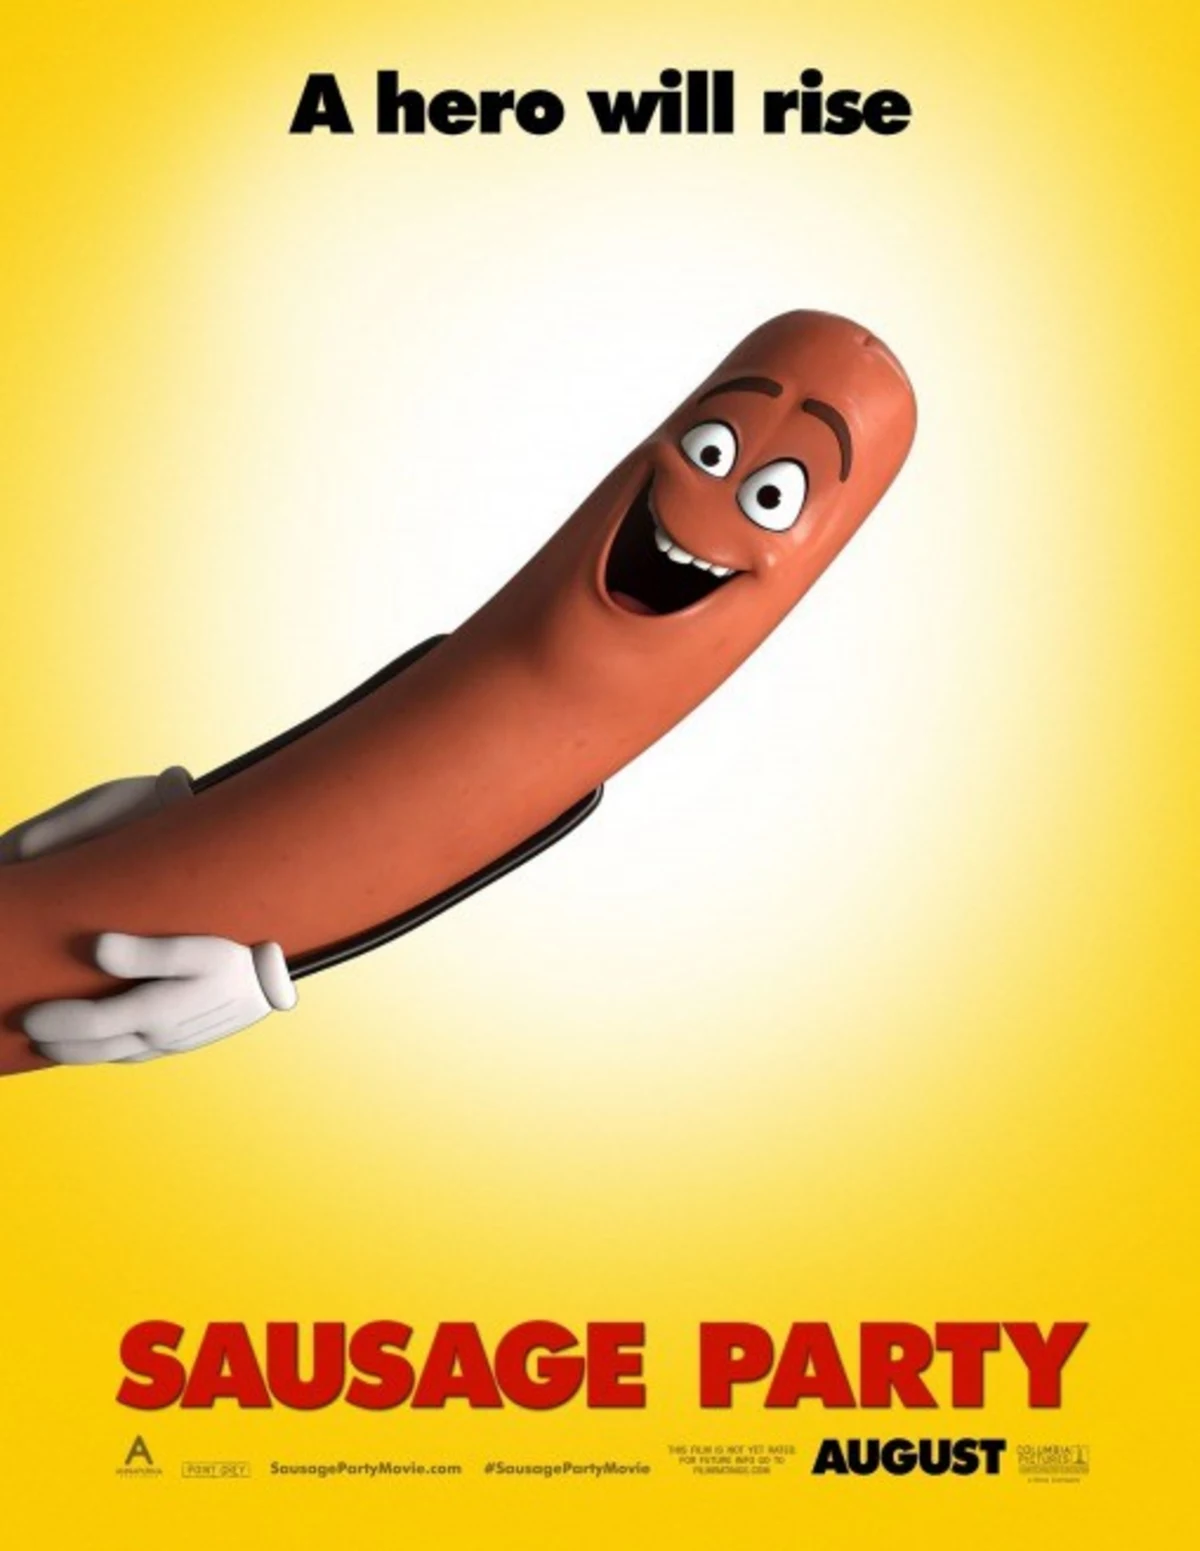 Sausage Party Is Unbelievably Hilarious And Raunchy